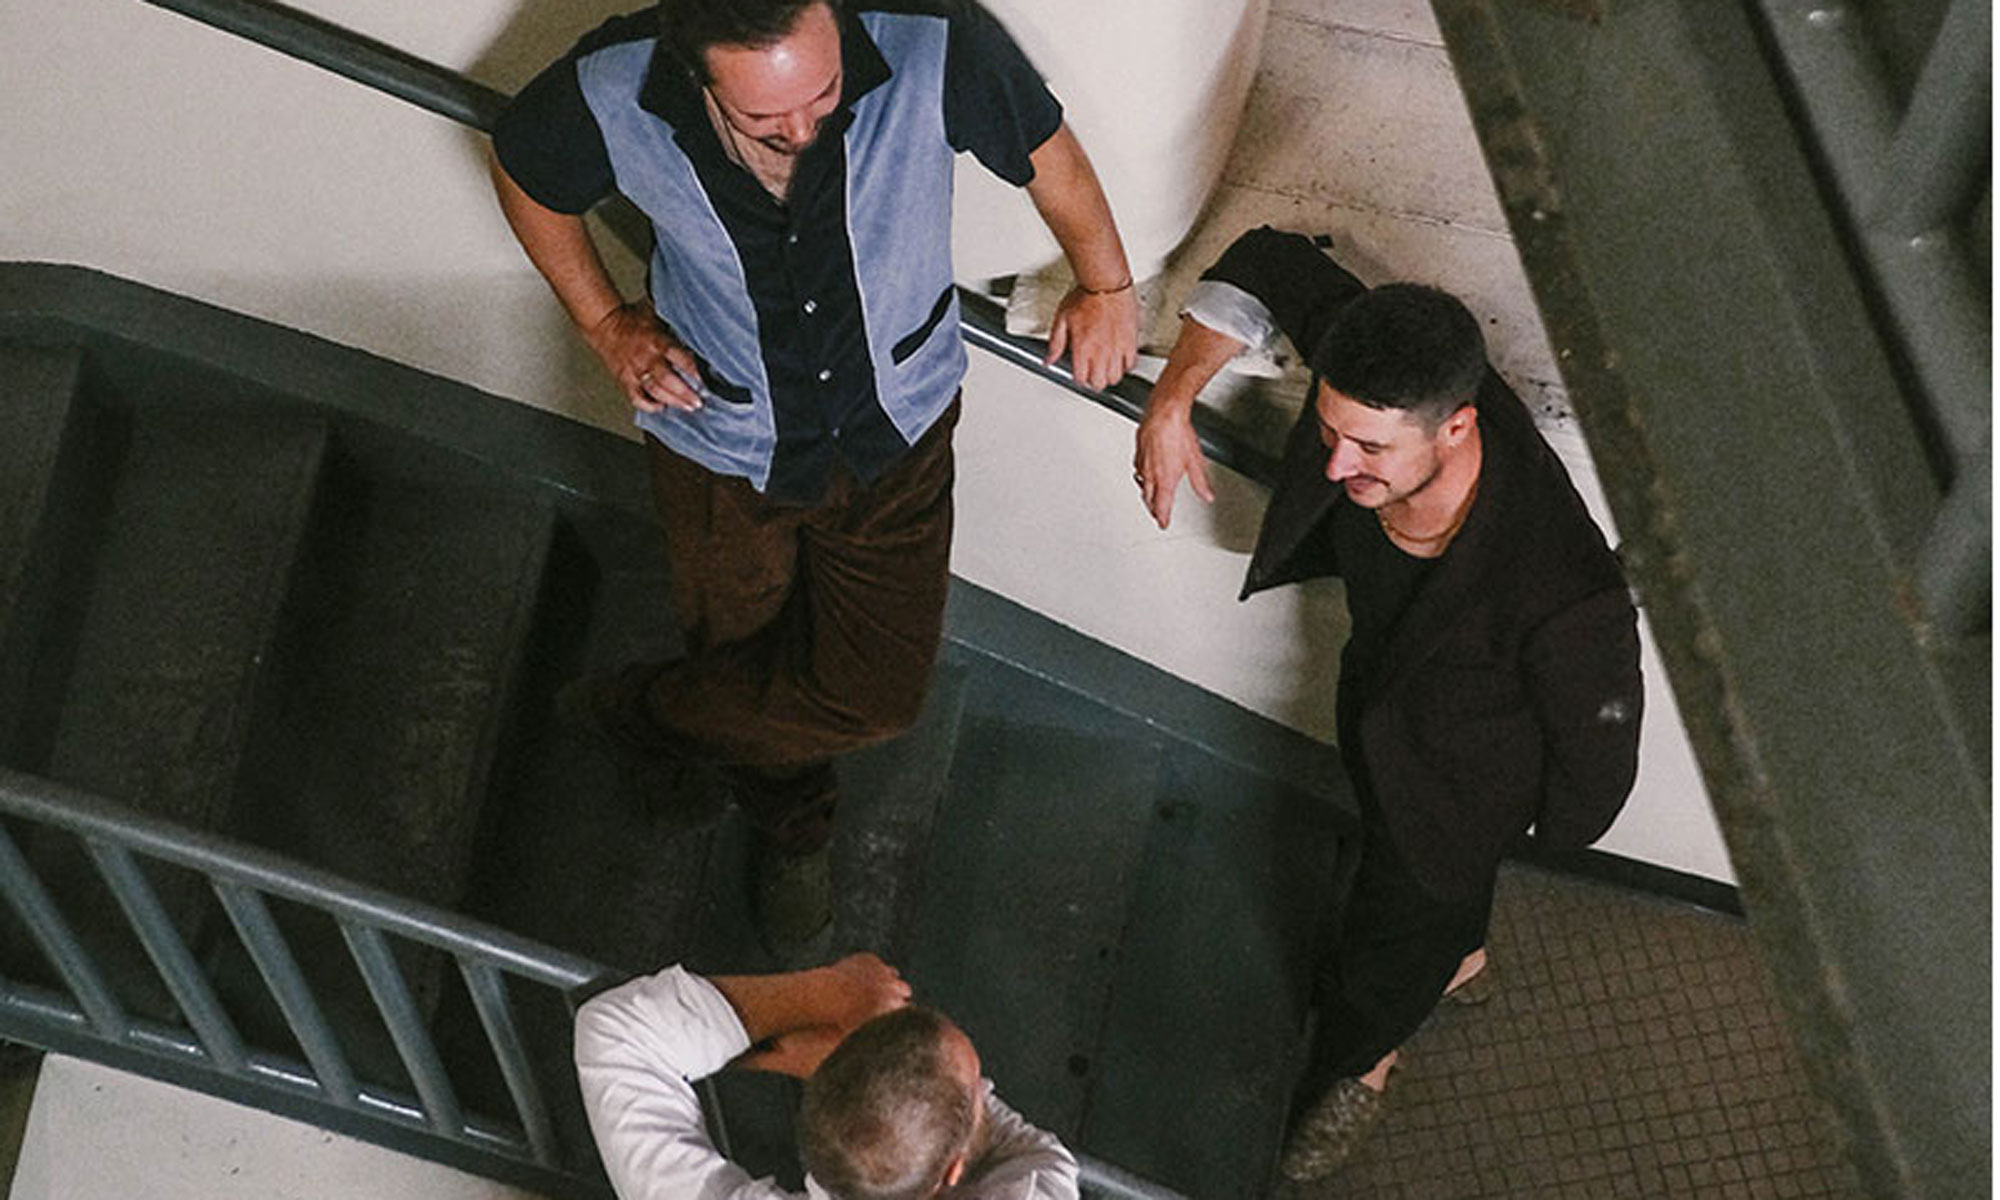 The three members of Mumford and Sons, as seen from above, chatting on a stairway